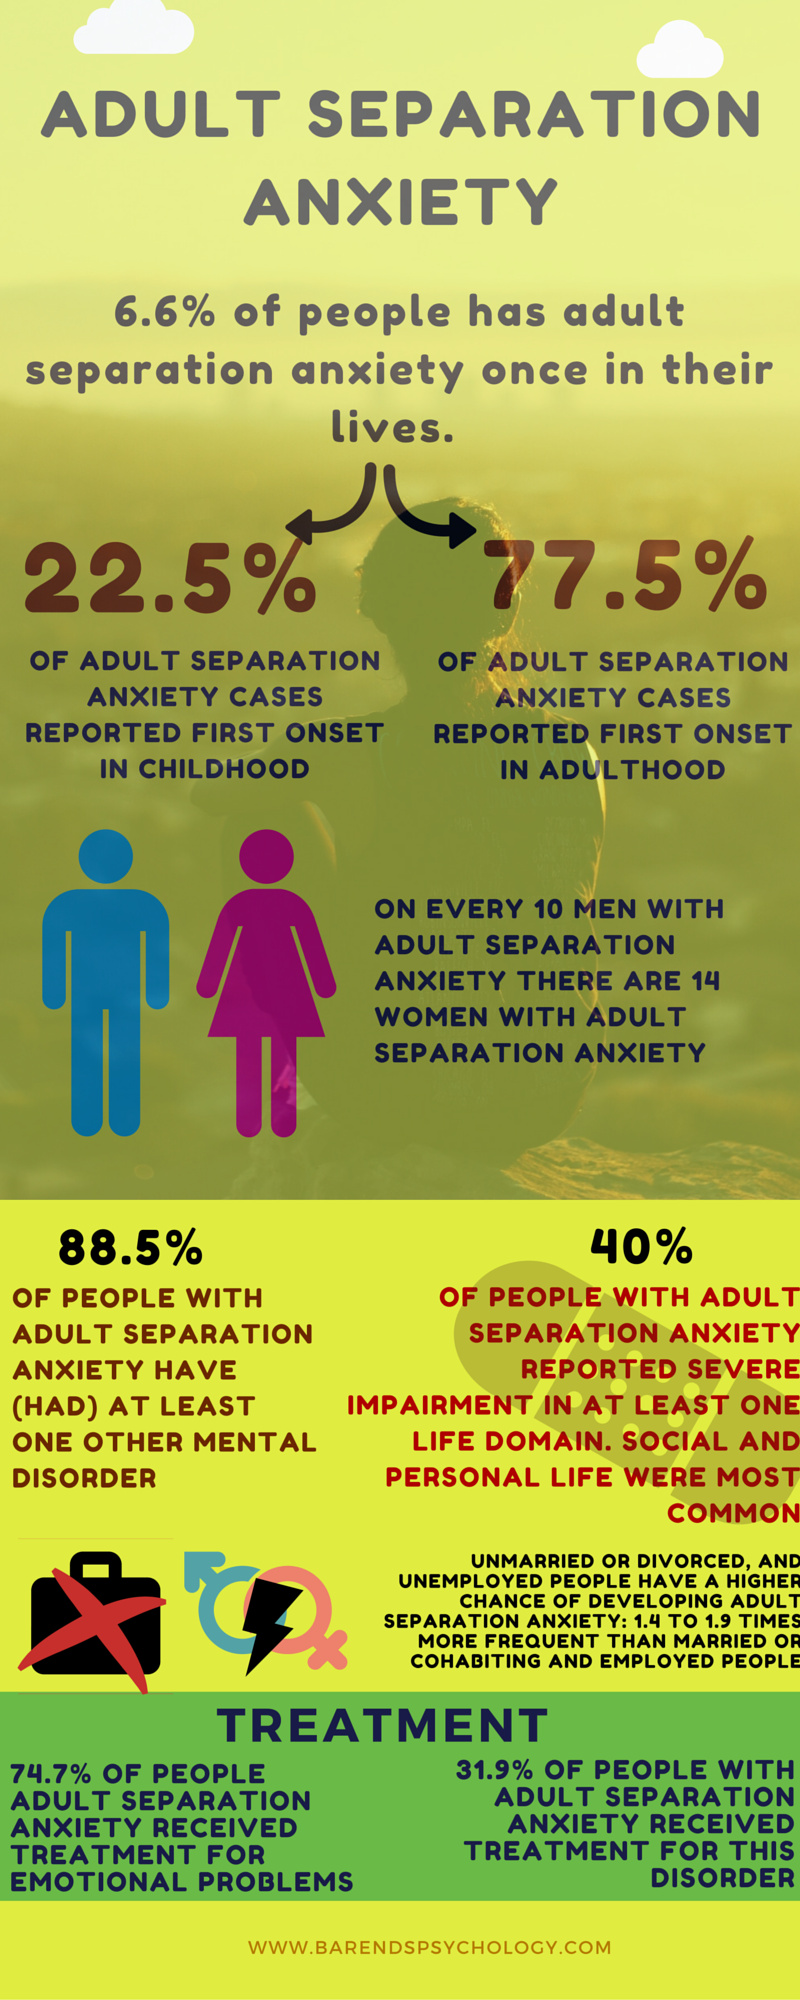 adult separation anxiety: how to overcome separation anxiety?